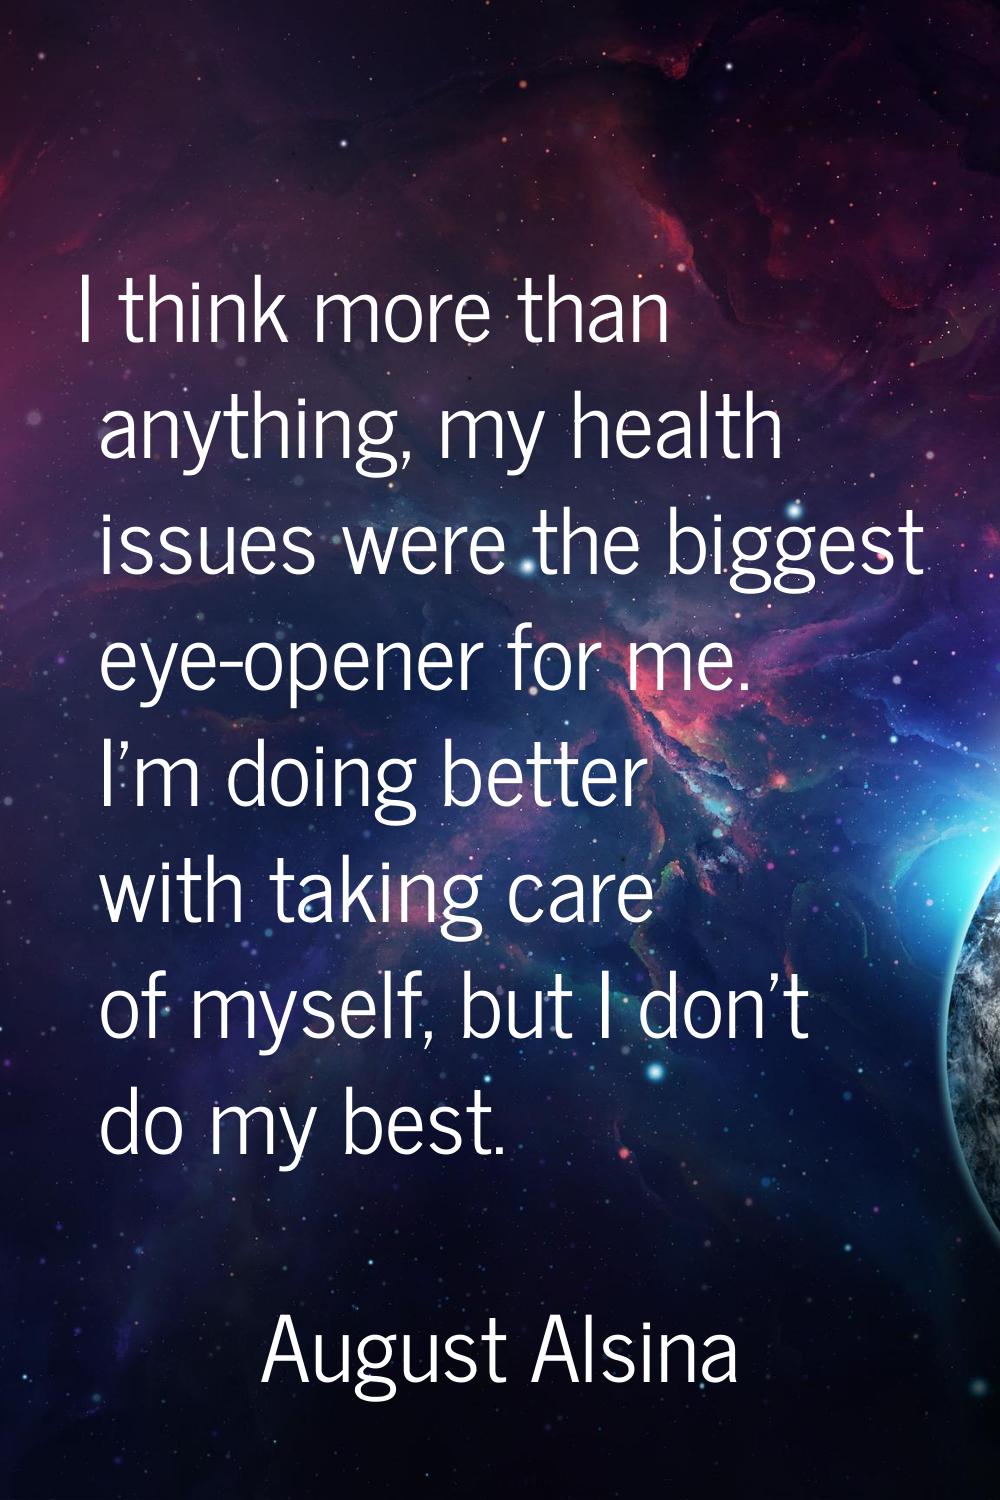 I think more than anything, my health issues were the biggest eye-opener for me. I'm doing better w